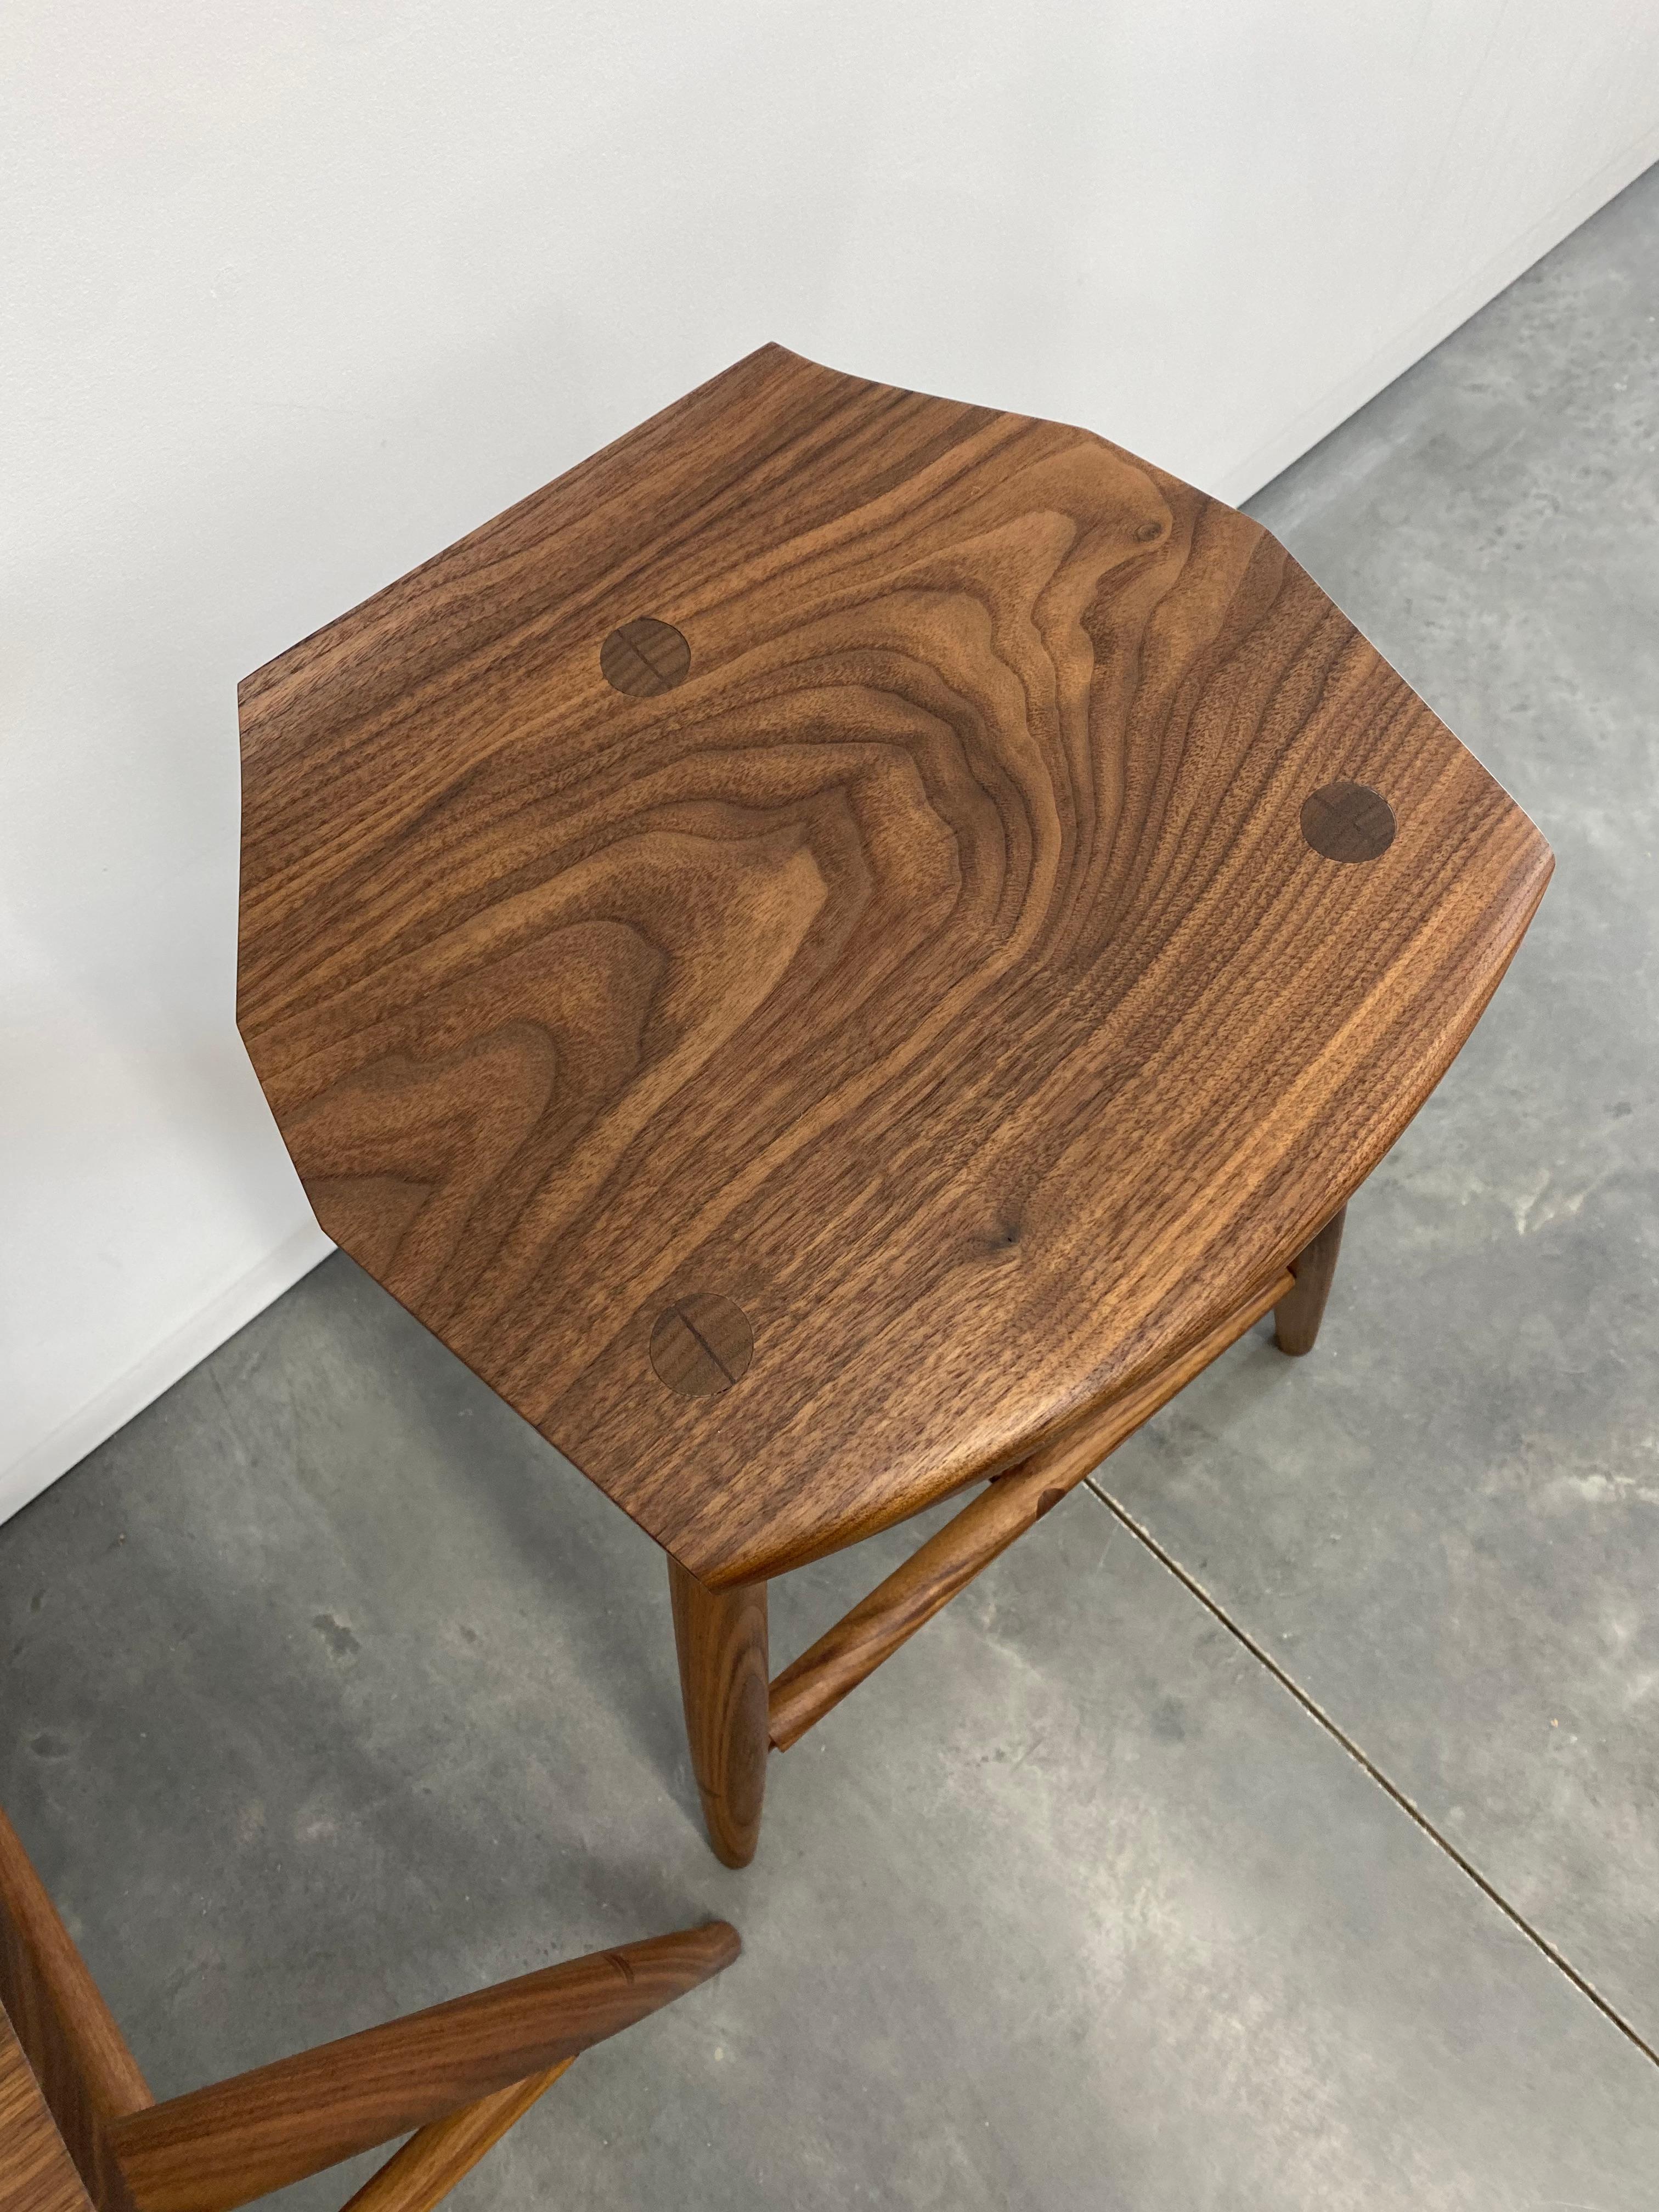 Hand-Crafted Jordan Walnut Counter Height 3-Legged Stool by New York Heartwoods - In Stock For Sale